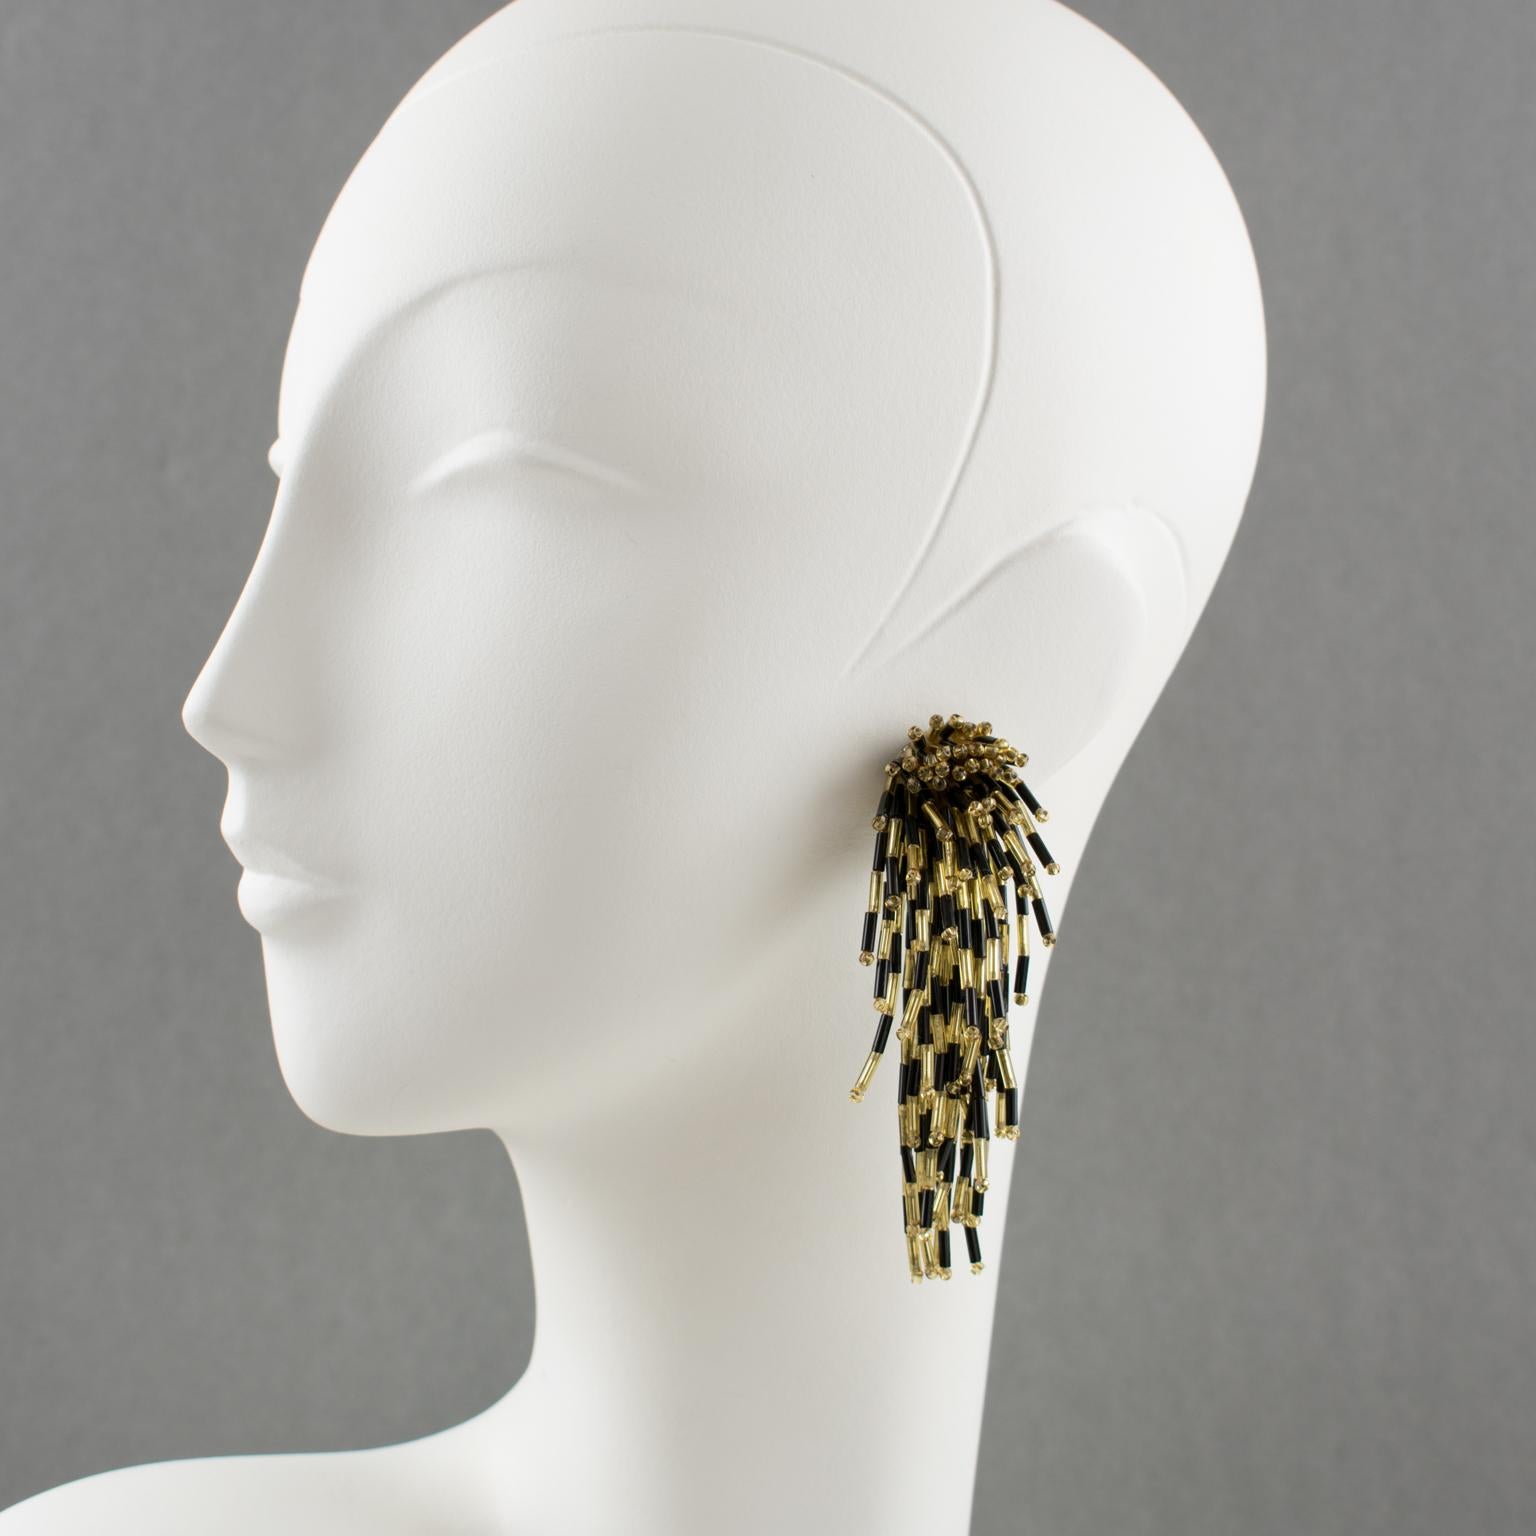 These stunning dangling glass clip-on earrings with a lionfish shape have an oversized shoulder-duster design with a cascading waterfall shape built with tiny black and gold glass stick beads. There is no visible maker's mark.
Measurements: 1.25 in